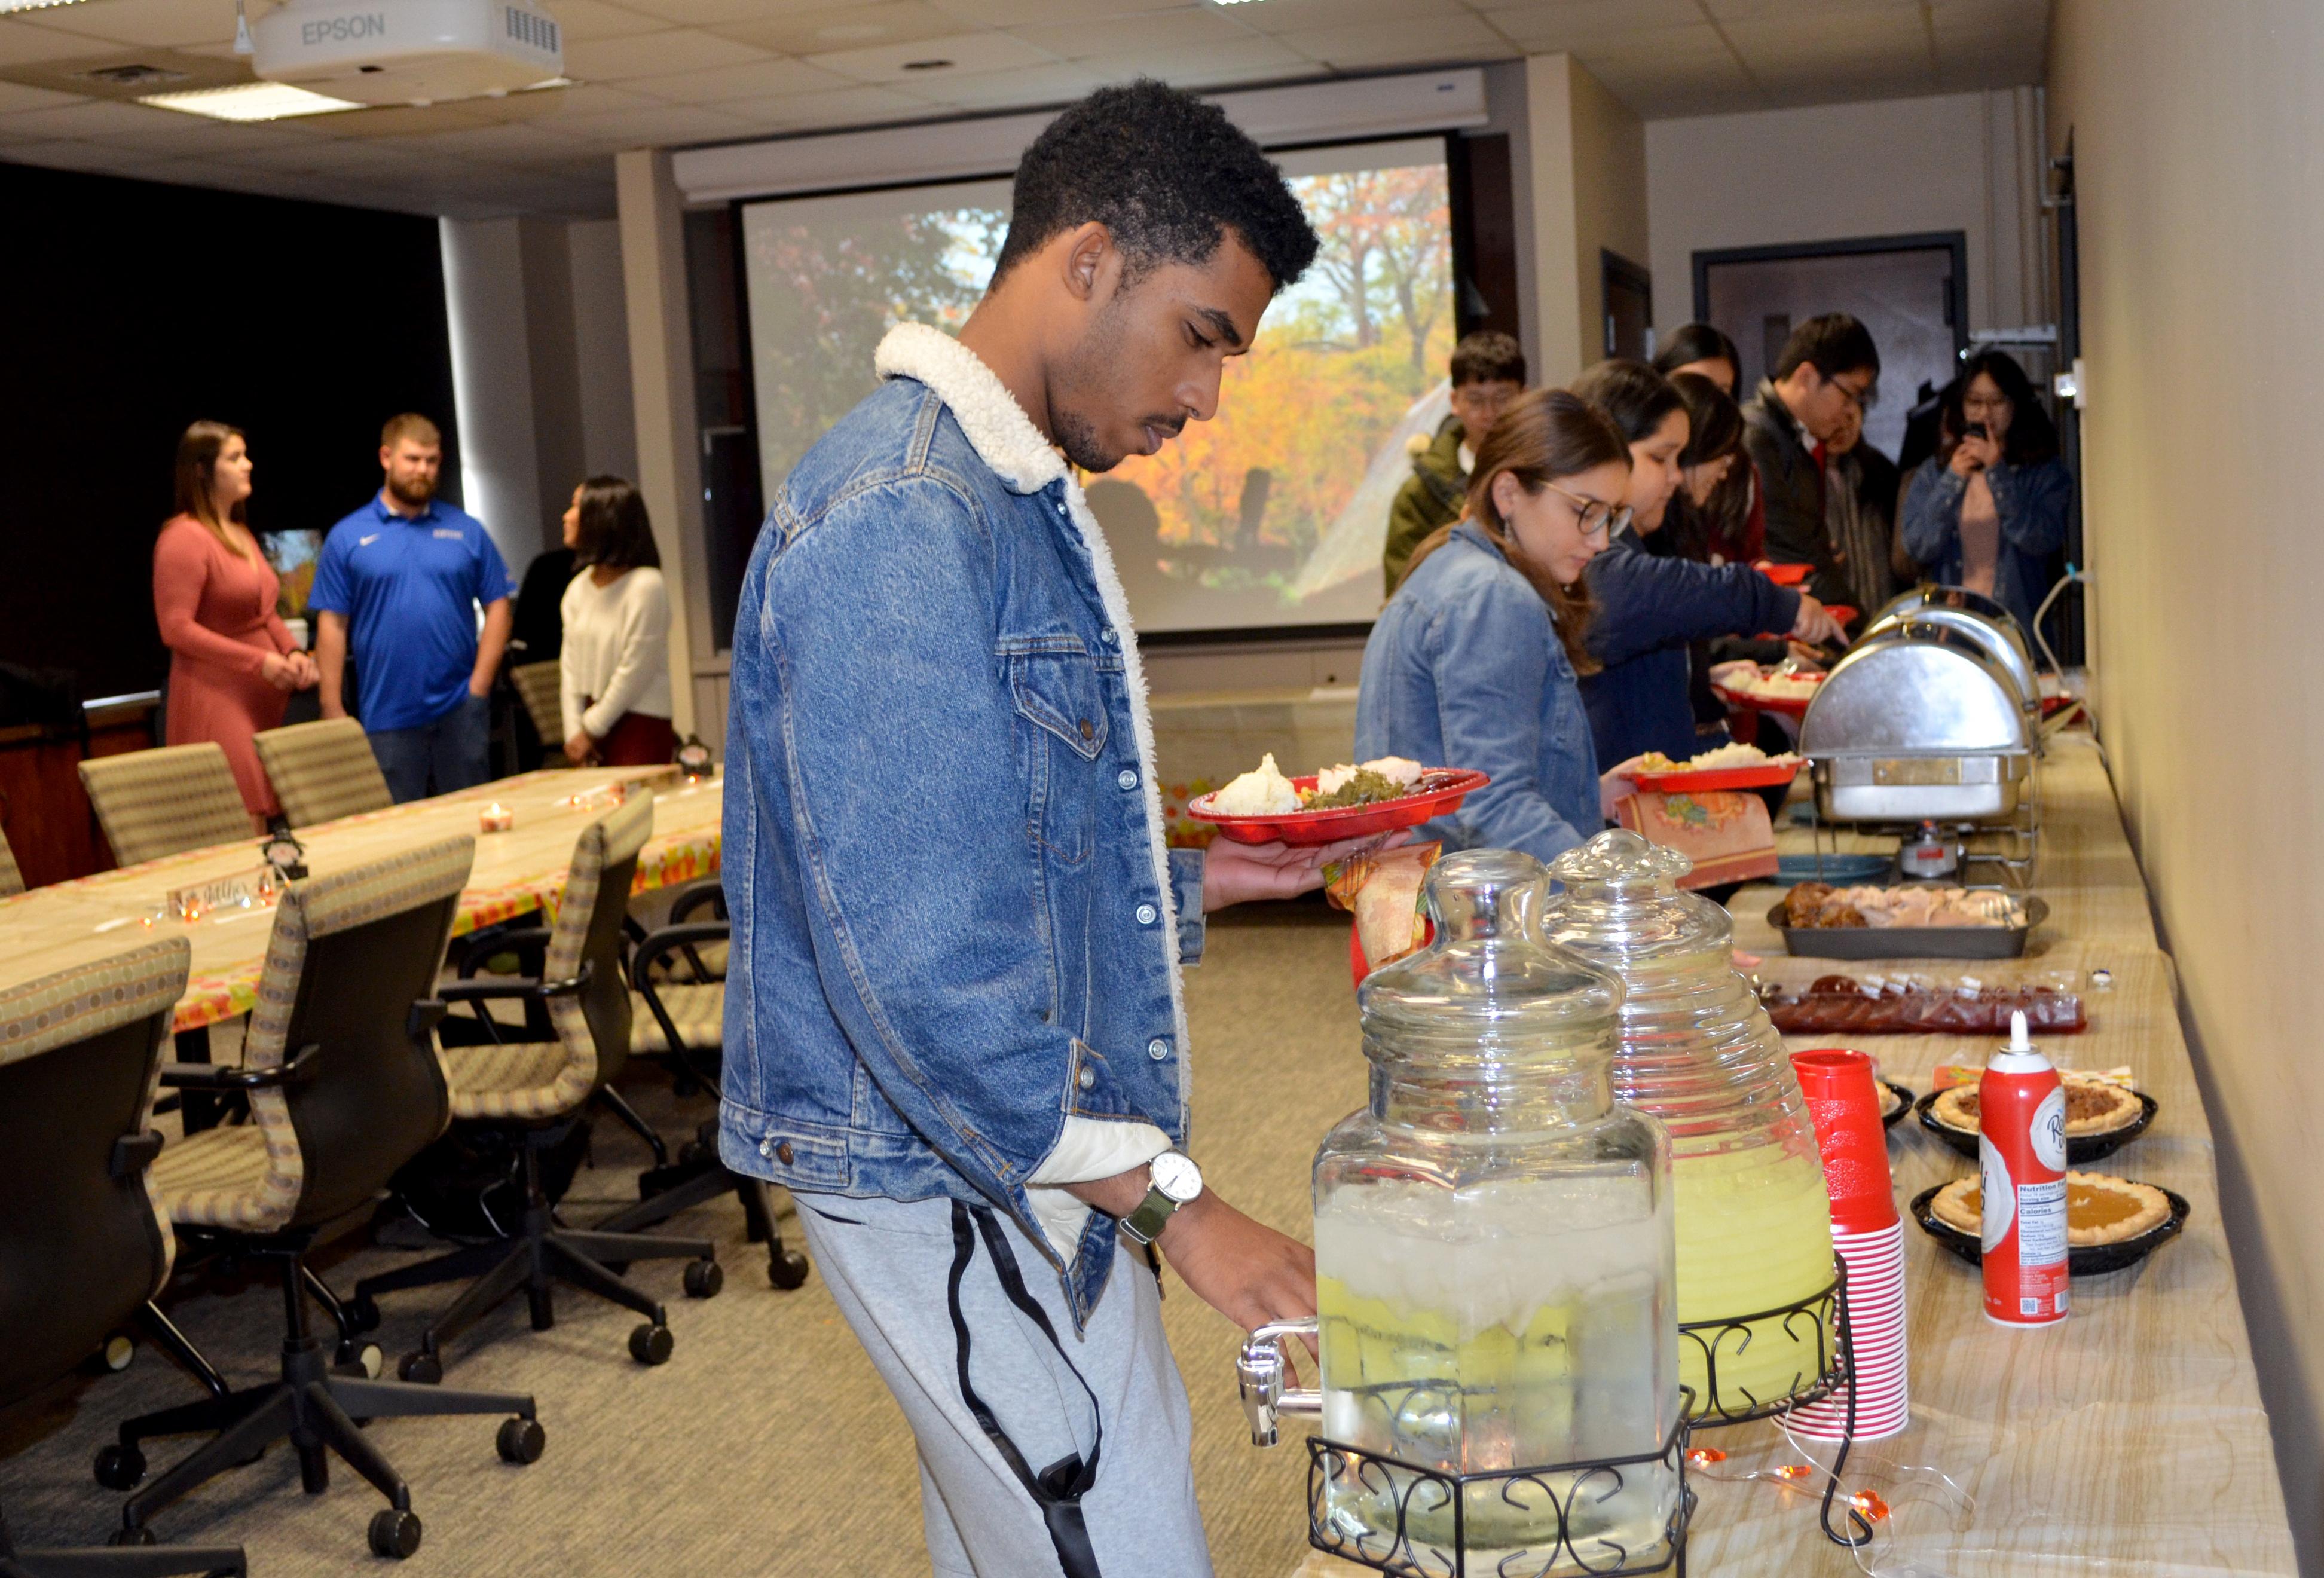 UK junior Ahmed Hamad pours some lemonade while making his way through the Thanksgiving buffet hosted by fellow UK students. Photo by Katie Pratt, UK agricultural communications.